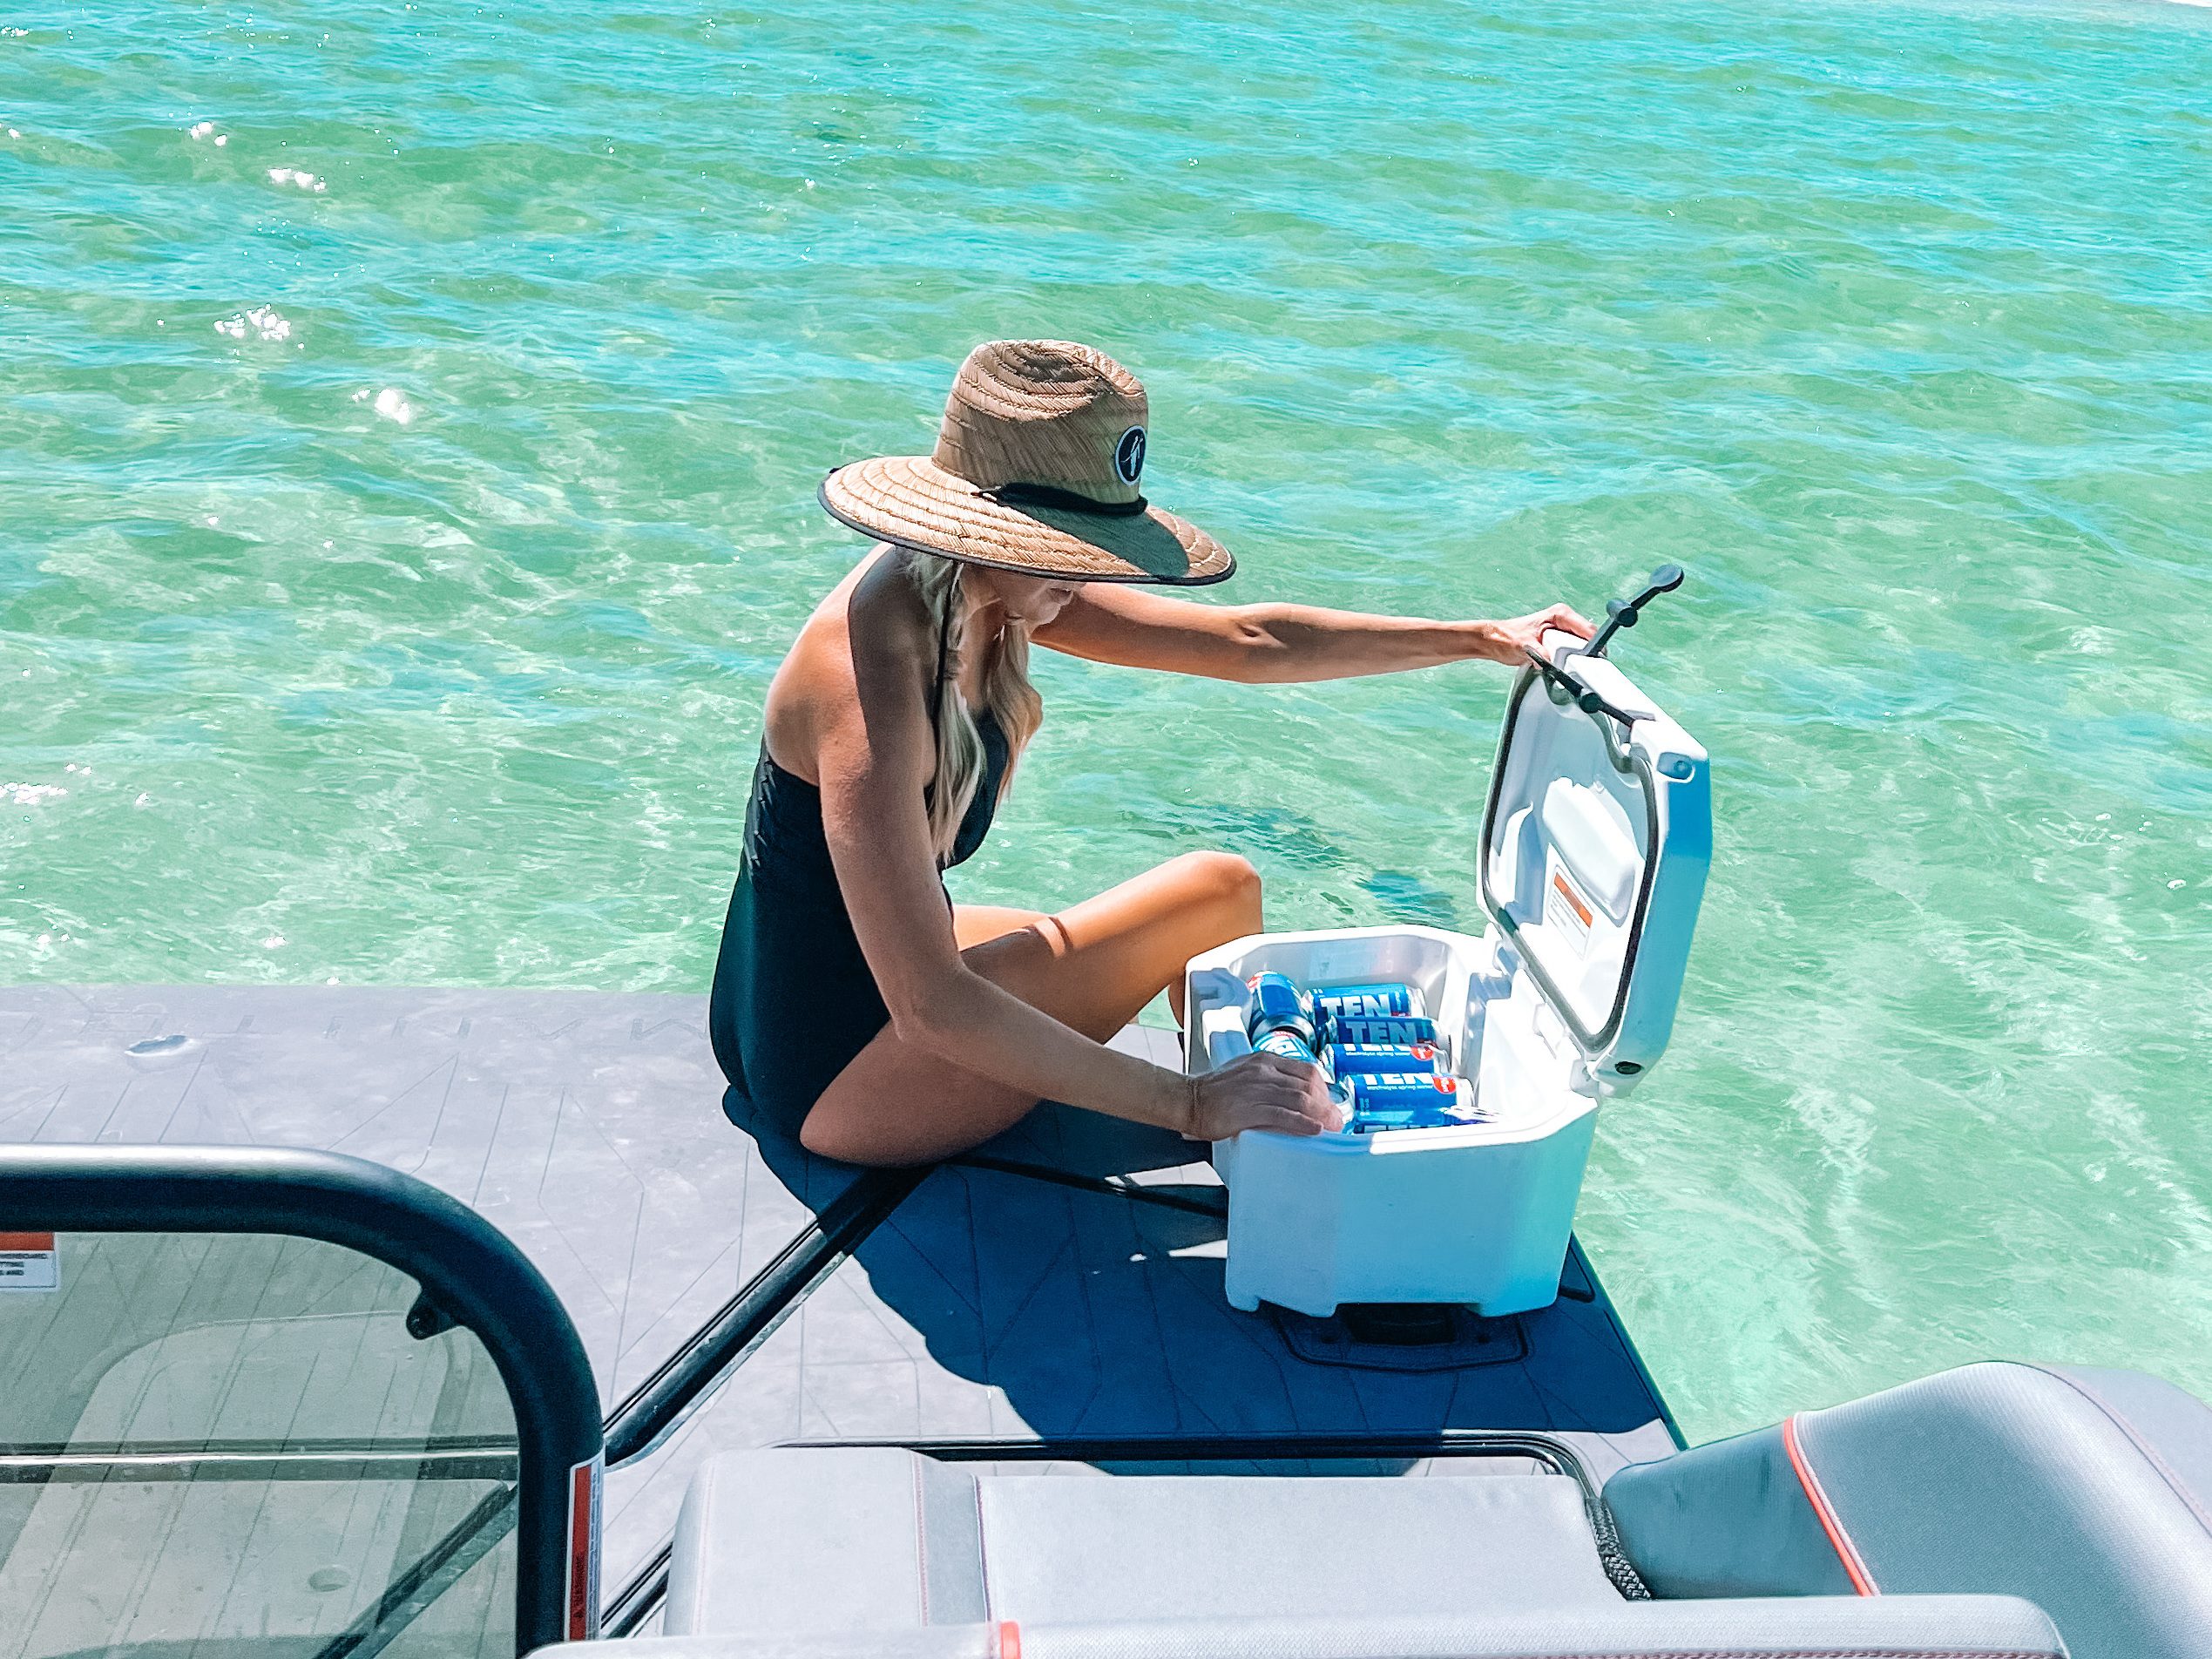 Jenny Reimold taking full advantage of her Explore pontoon's Max Deck while grabbing something from a LinQ cooler